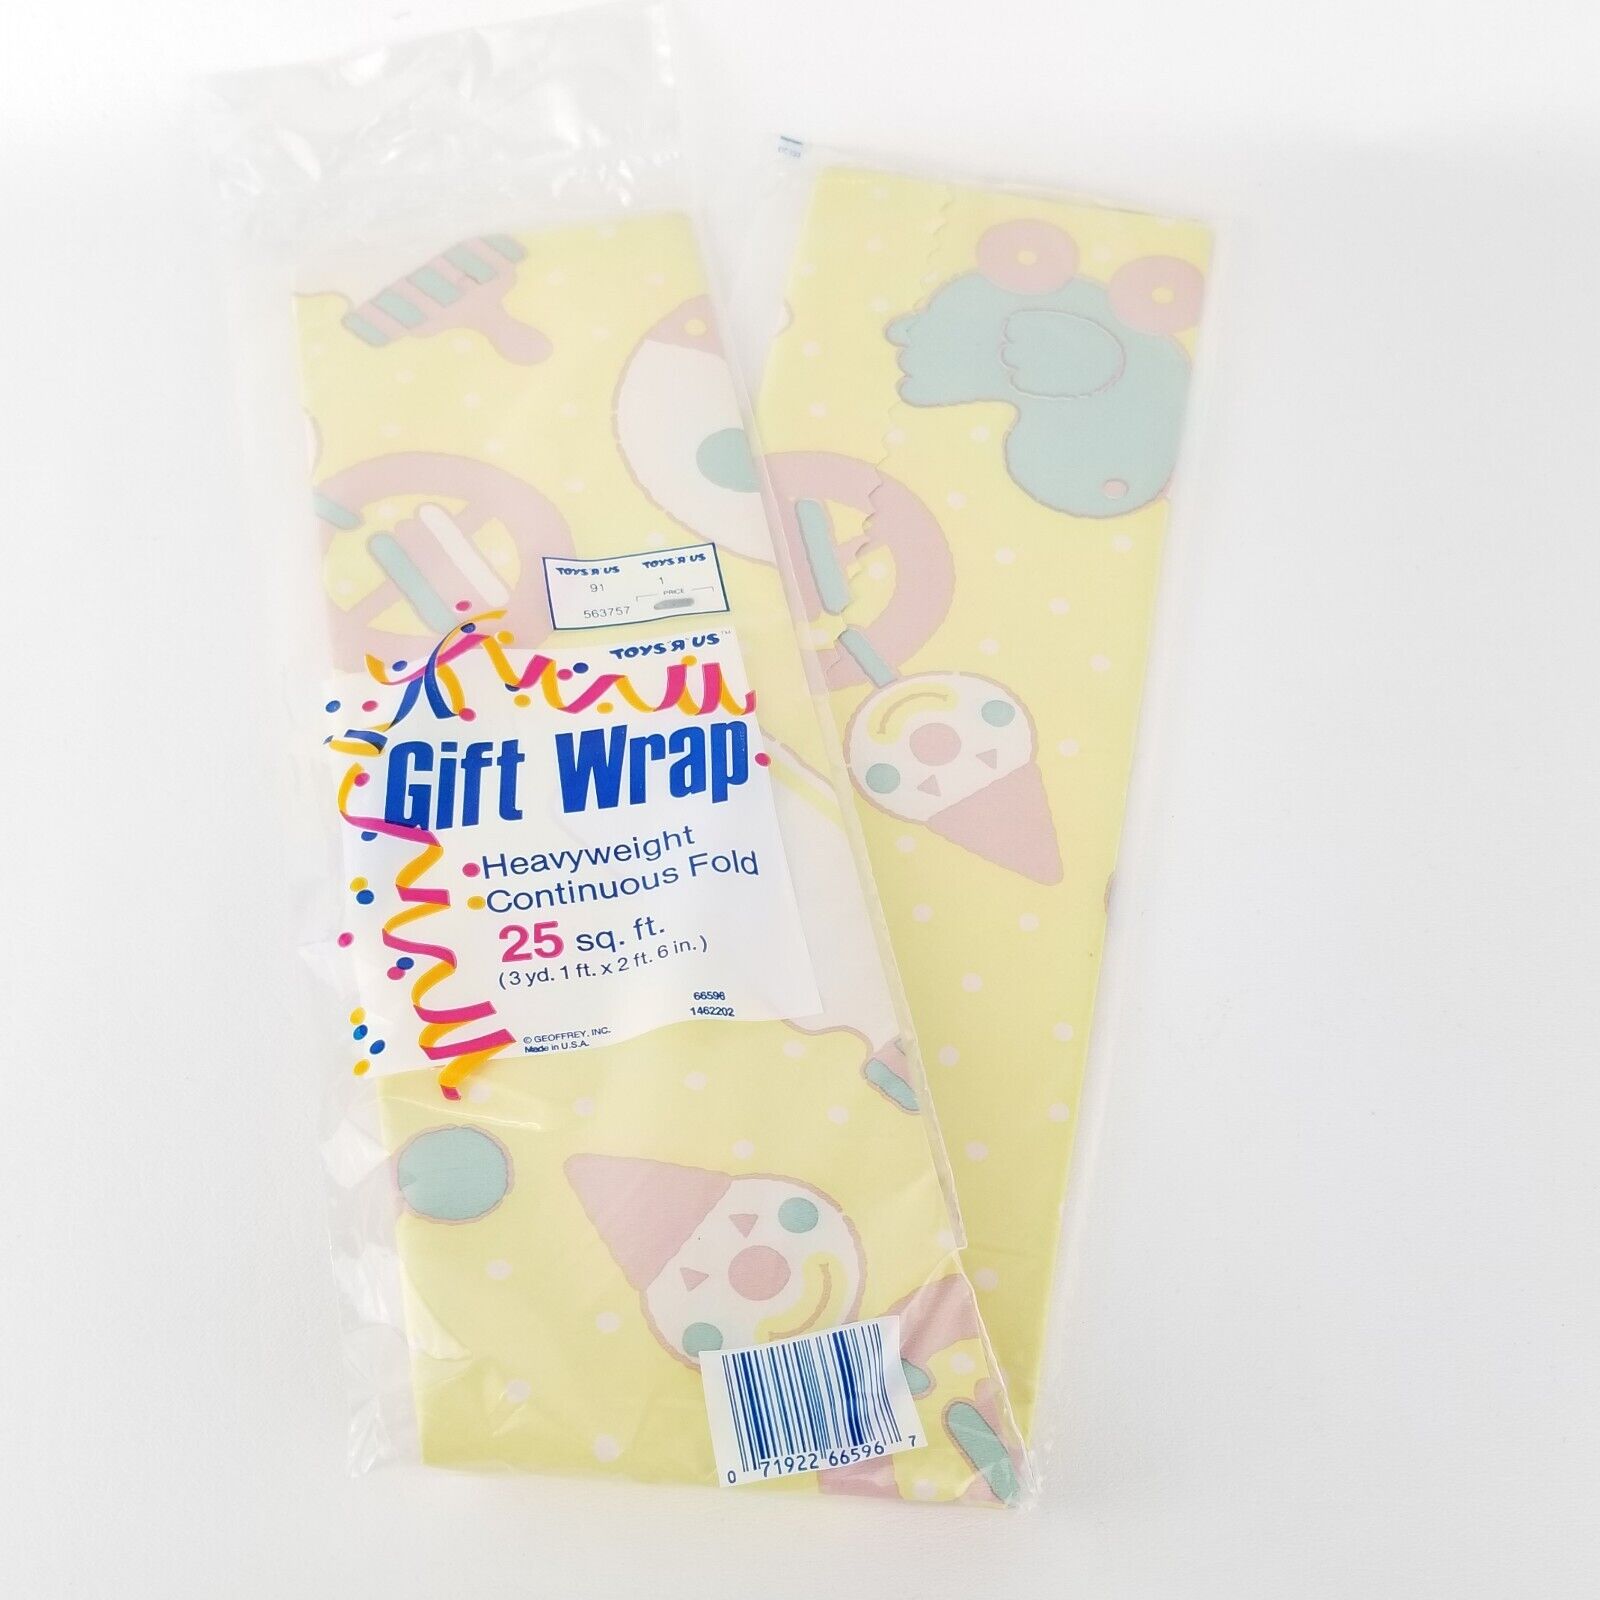 VTG BABY SHOWER Gift Wrap Toy\'s R Us Wrapping Gifts 25 Sq Ft Vintage Made USA